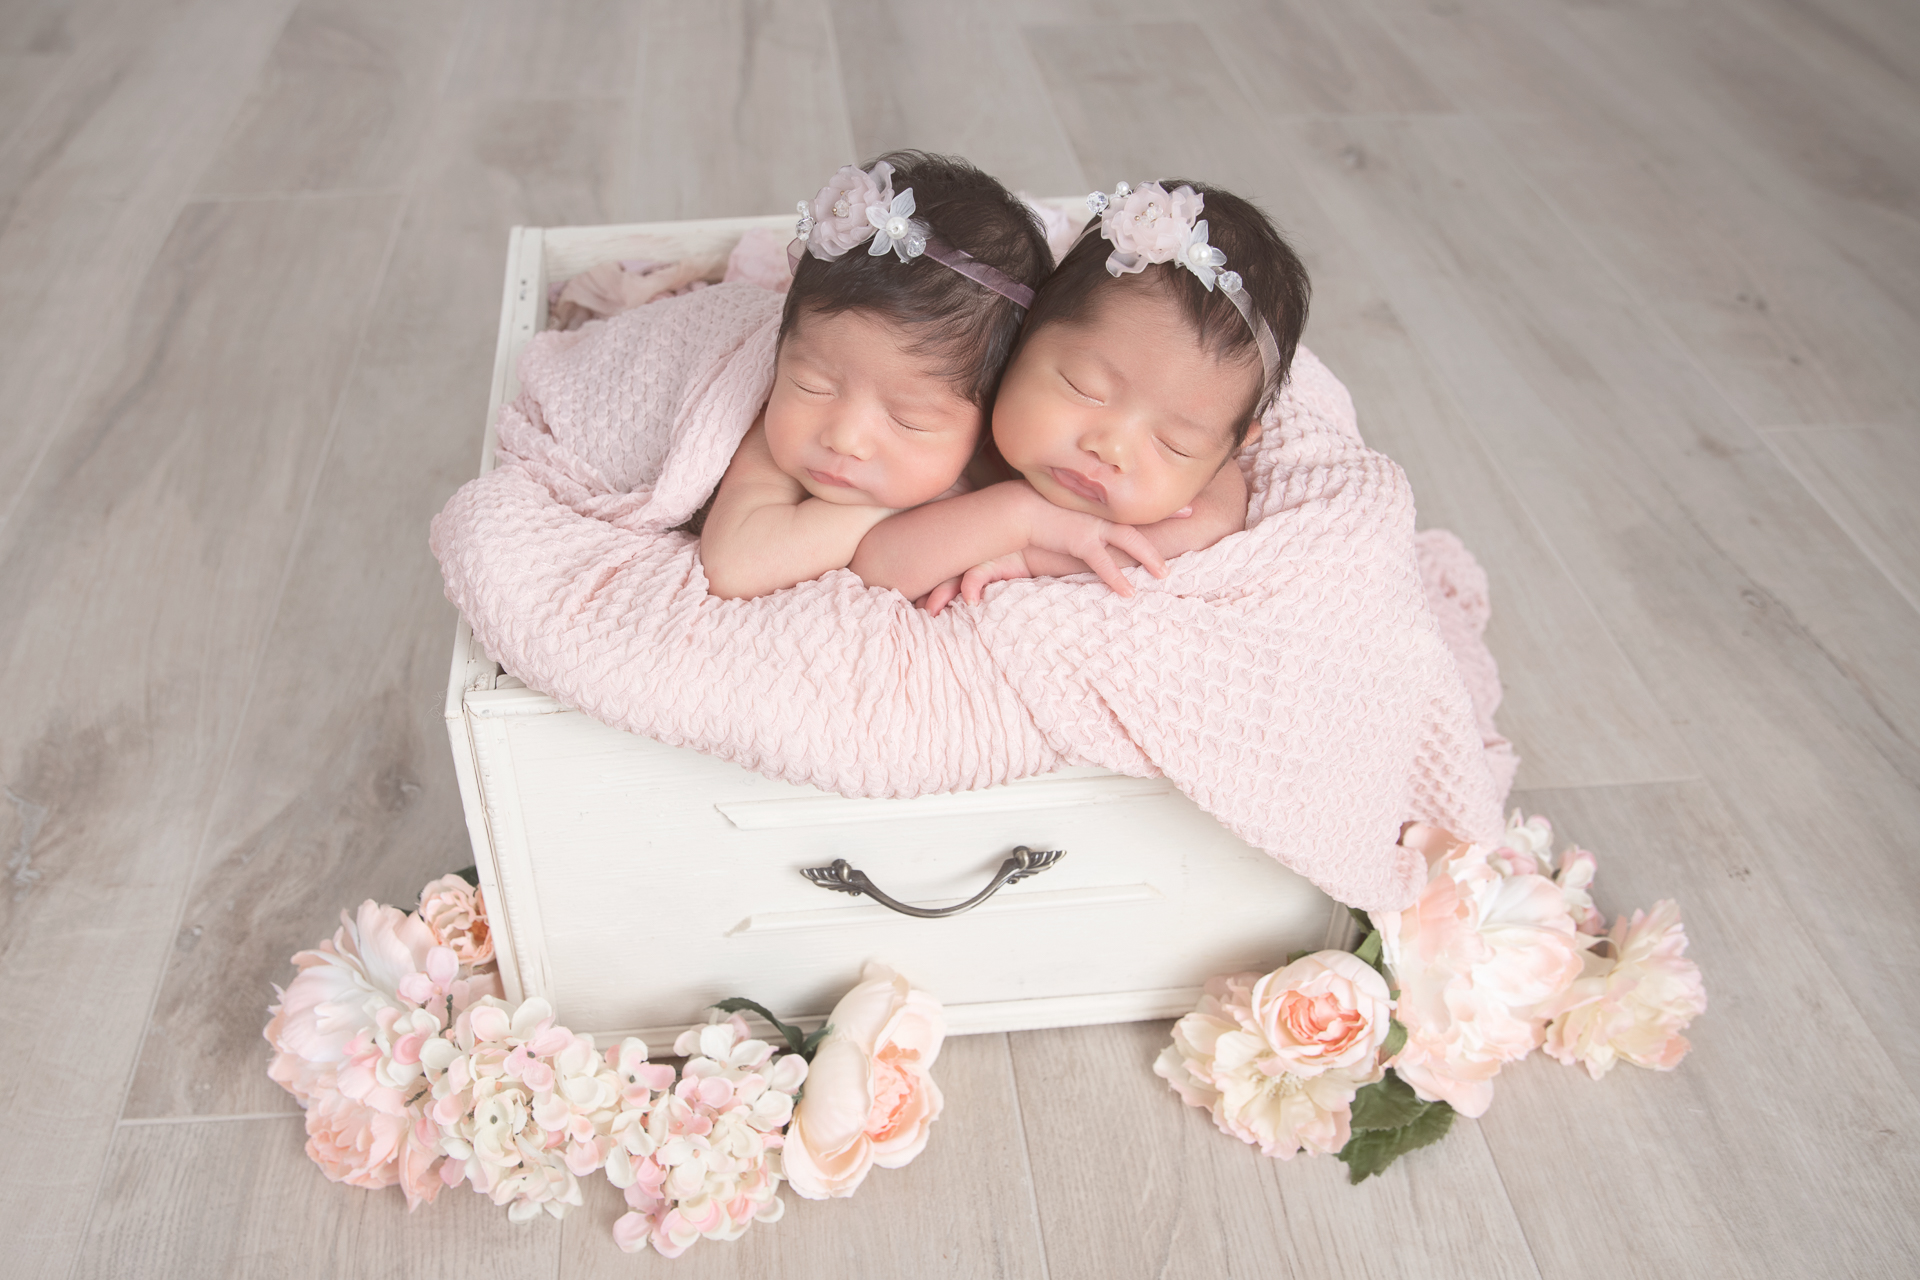 Two newborn sisters posing on a square basket prop wearing pink headbands, flowers decorate the scene